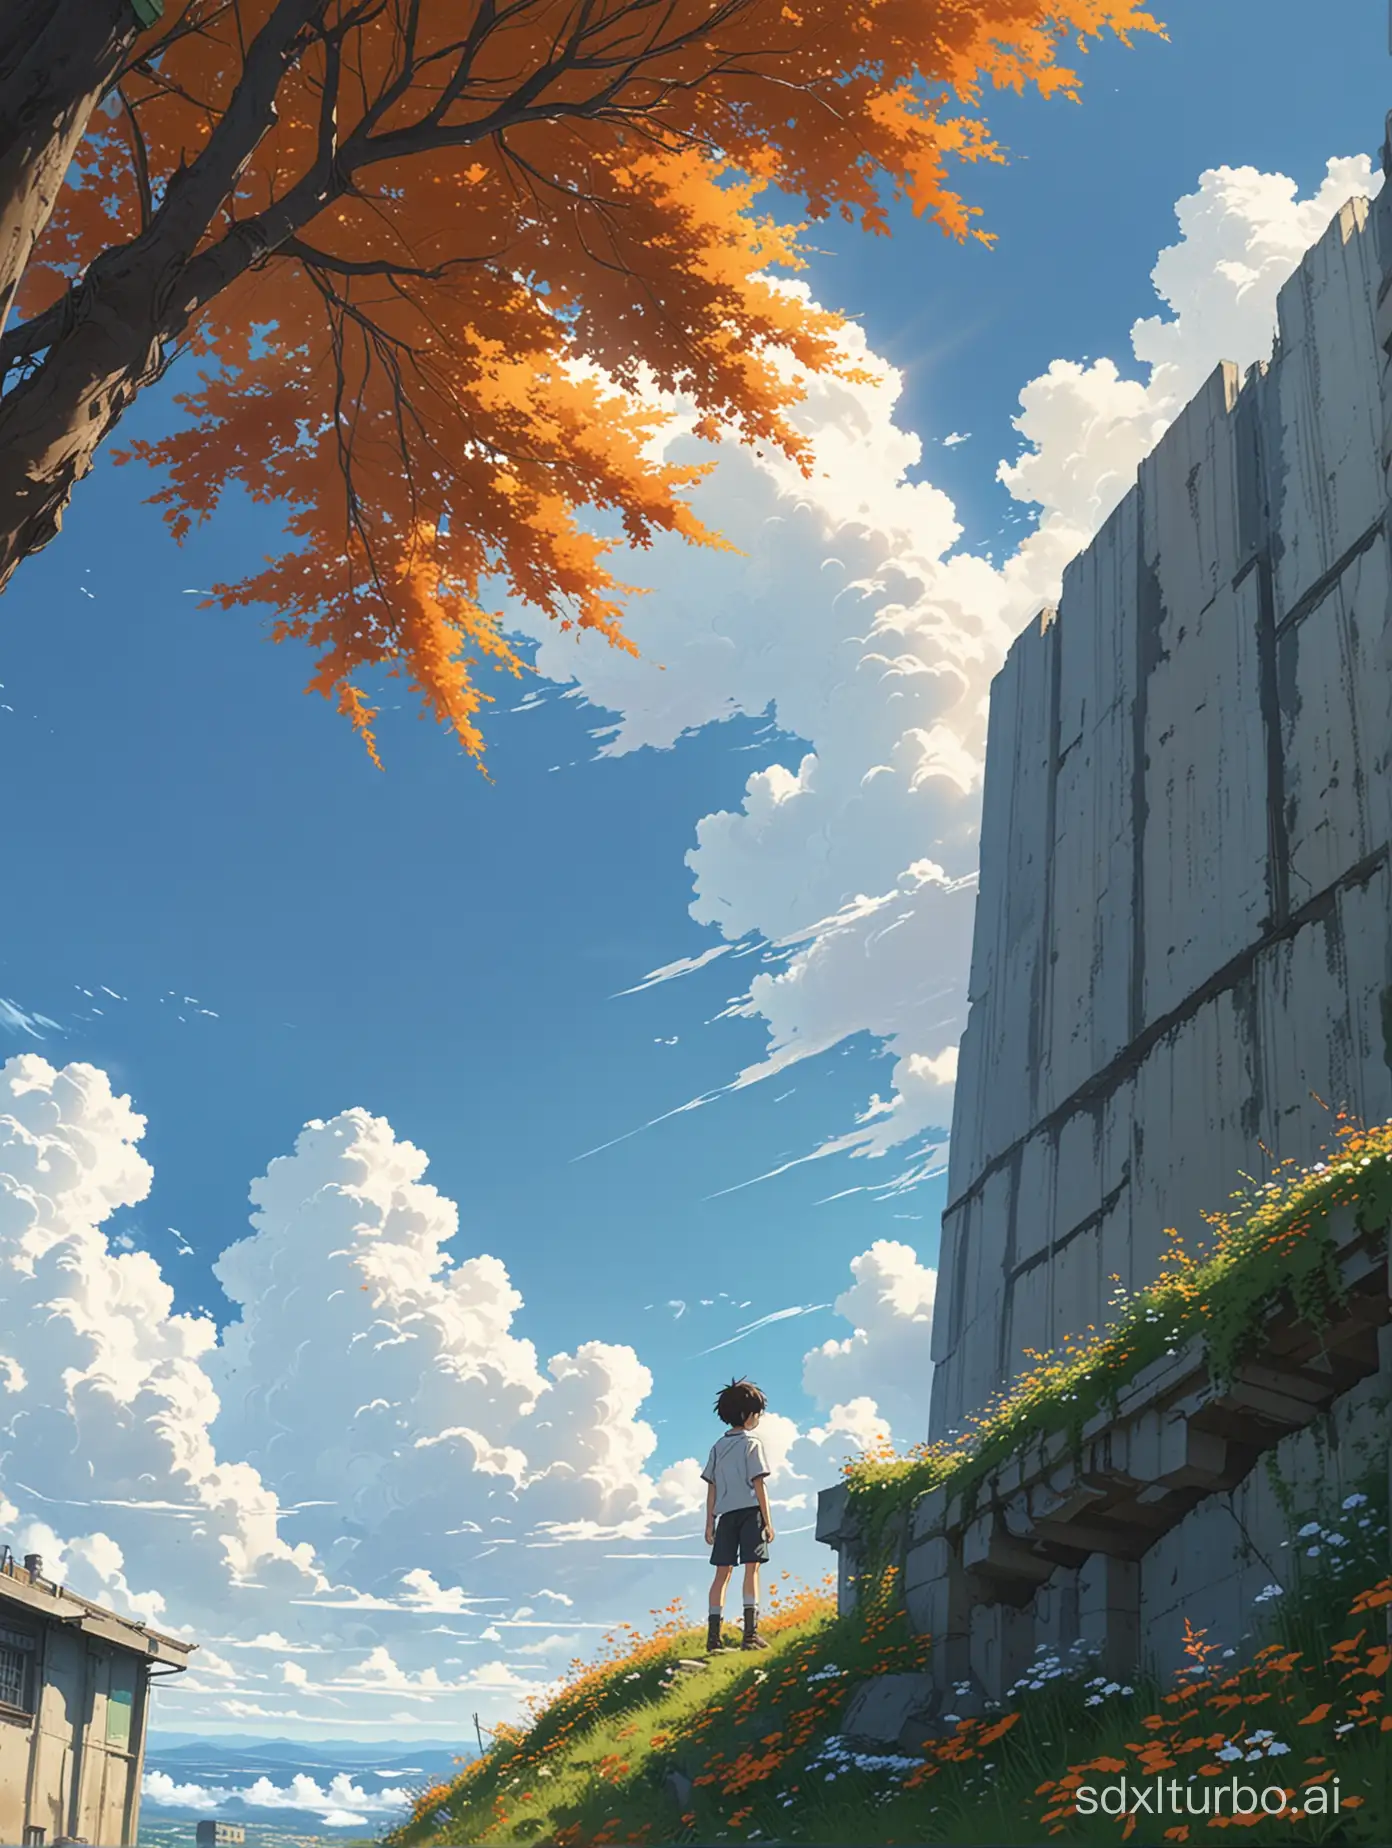 A serene Makoto Shinkai-inspired anime scene, featuring a young boy standing on the edge of a towering building reclaimed by nature, full of grass and flowers. A tree with orange leaves stands nearby, against a backdrop of blue sky and fluffy white clouds. The scene is captured from a high angle view, vivid and picturesque.